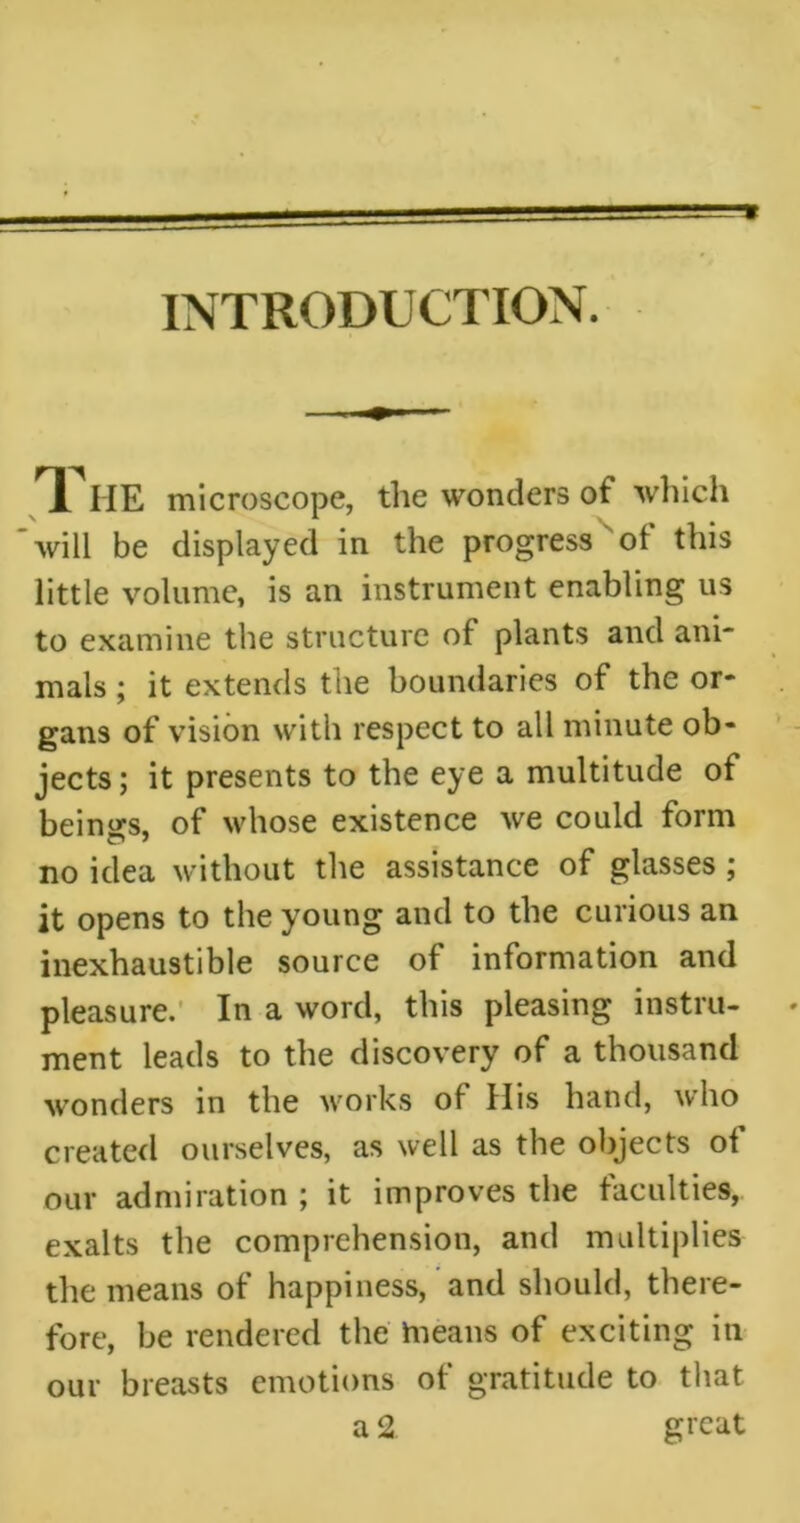 * INTRODUCTION. T. ME microscope, the wonders of which will be displayed in the progress of this little volume, is an instrument enabling us to examine the structure of plants and ani- mals ; it extends the boundaries of the or- gans of vision with respect to all minute ob- jects; it presents to the eye a multitude of beings, of whose existence we could form no idea without the assistance of glasses ; it opens to the young and to the curious an inexhaustible source of information and pleasure. In a word, this pleasing instru- • ment leads to the discovery of a thousand wonders in the works of His hand, who created ourselves, as well as the objects of our admiration ; it improves the faculties, exalts the comprehension, and multiplies the means of happiness, and should, there- fore, be rendered the hieans of exciting in our breasts emotions of gratitude to that a 2 great